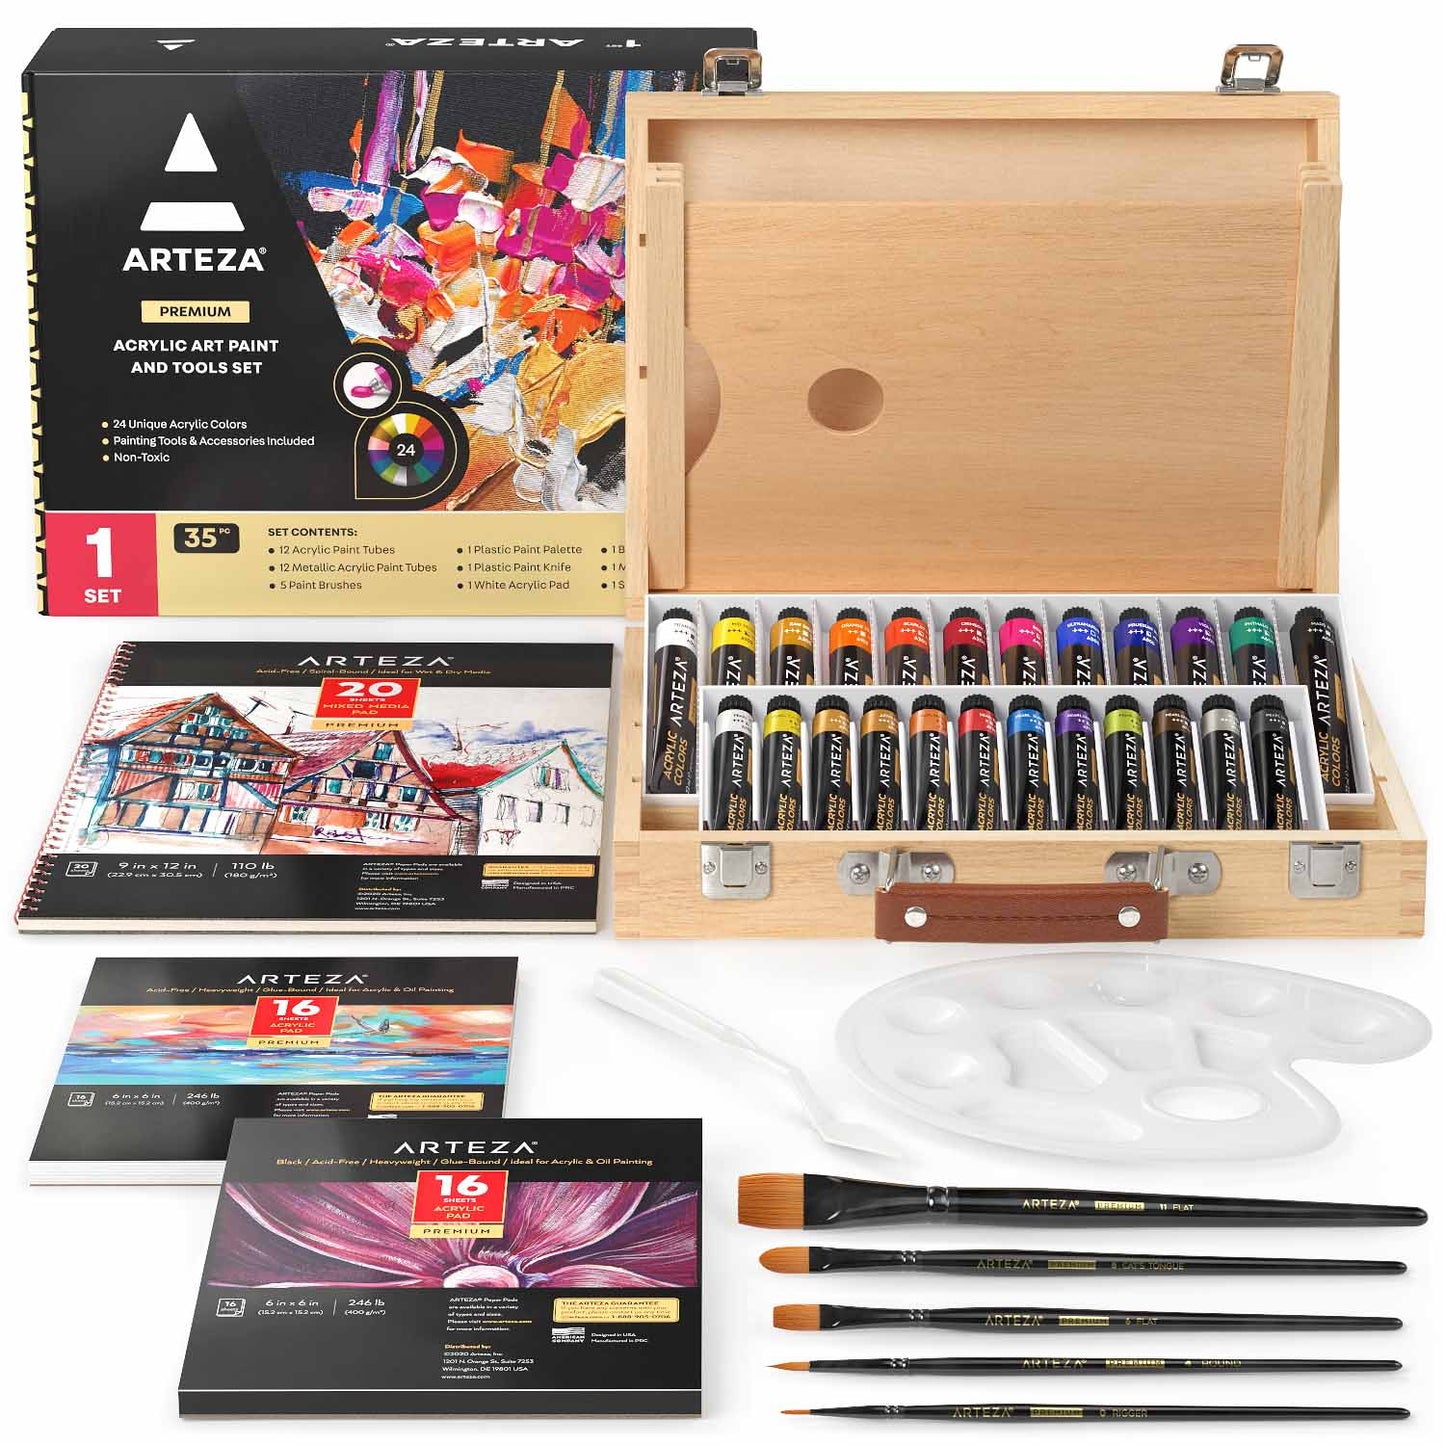 Five Fabulous Gifts for Artists, Acrylic Artist's Edition